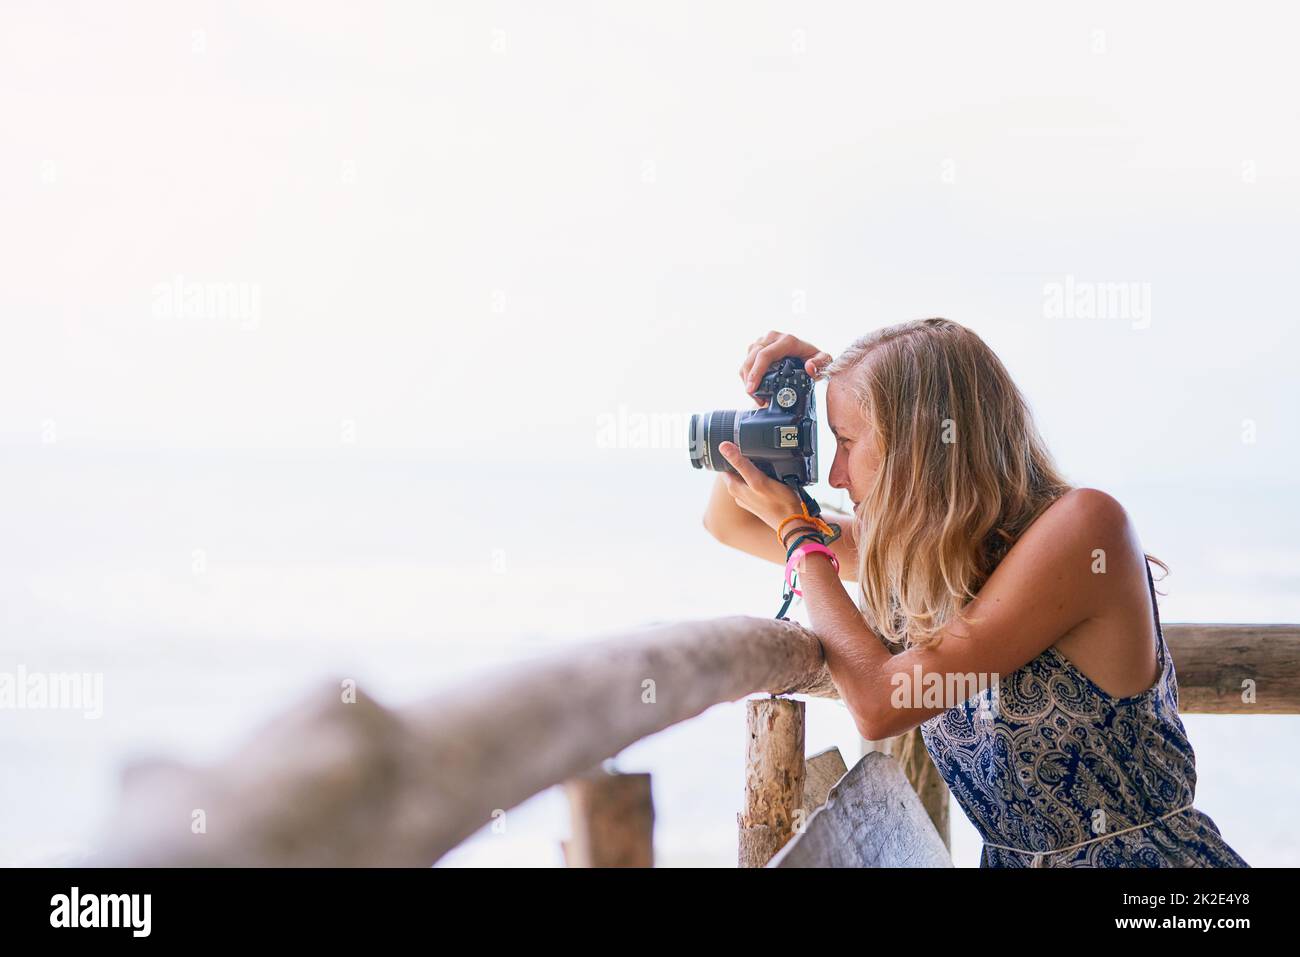 Framing the perfect holiday photo. Shot of a young woman taking pictures while on holiday in Thailand. Stock Photo